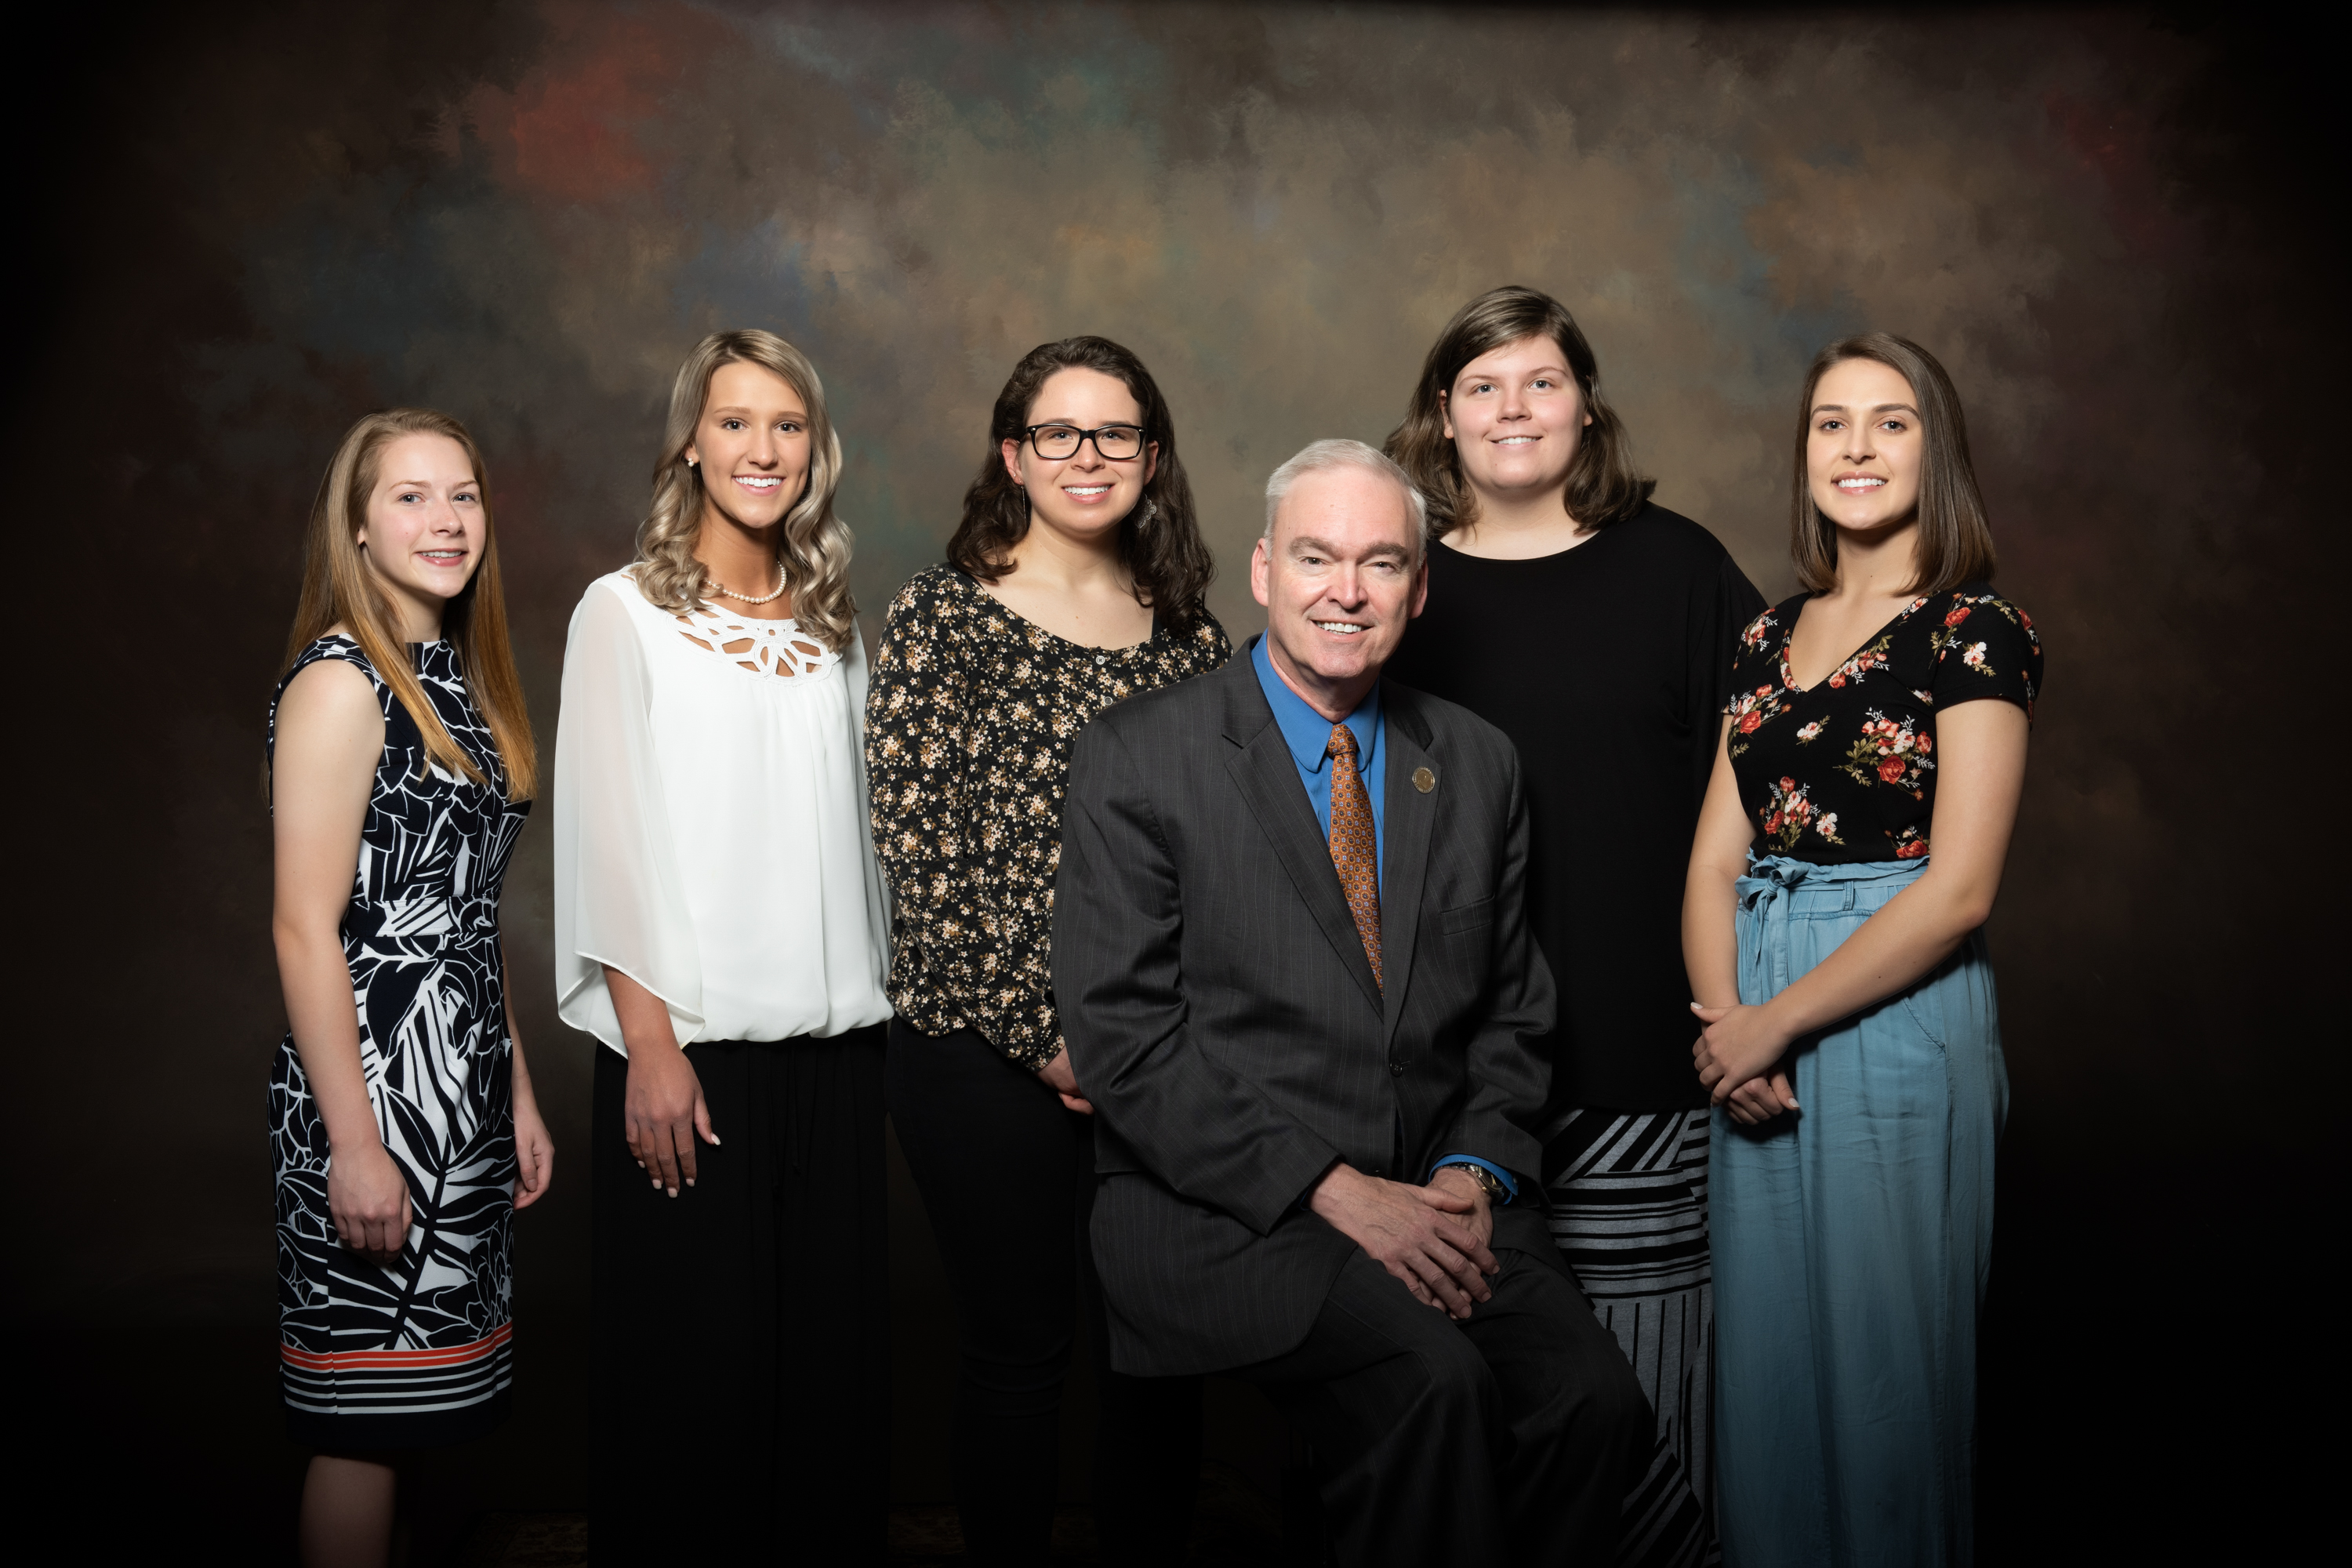 Randolph Community College recently selected its Presidential Scholars for the 2019-20 school year. Pictured, left to right with RCC President Dr. Robert Shackleford Jr., are Jessie Holmes (Asheboro High School), Joanna Harrelson (Southwestern Randolph High School), Lauren Regan (Southwestern Randolph High School), Melanie Garner (Faith Christian School), and Abigail Barker (Uwharrie Charter Academy).